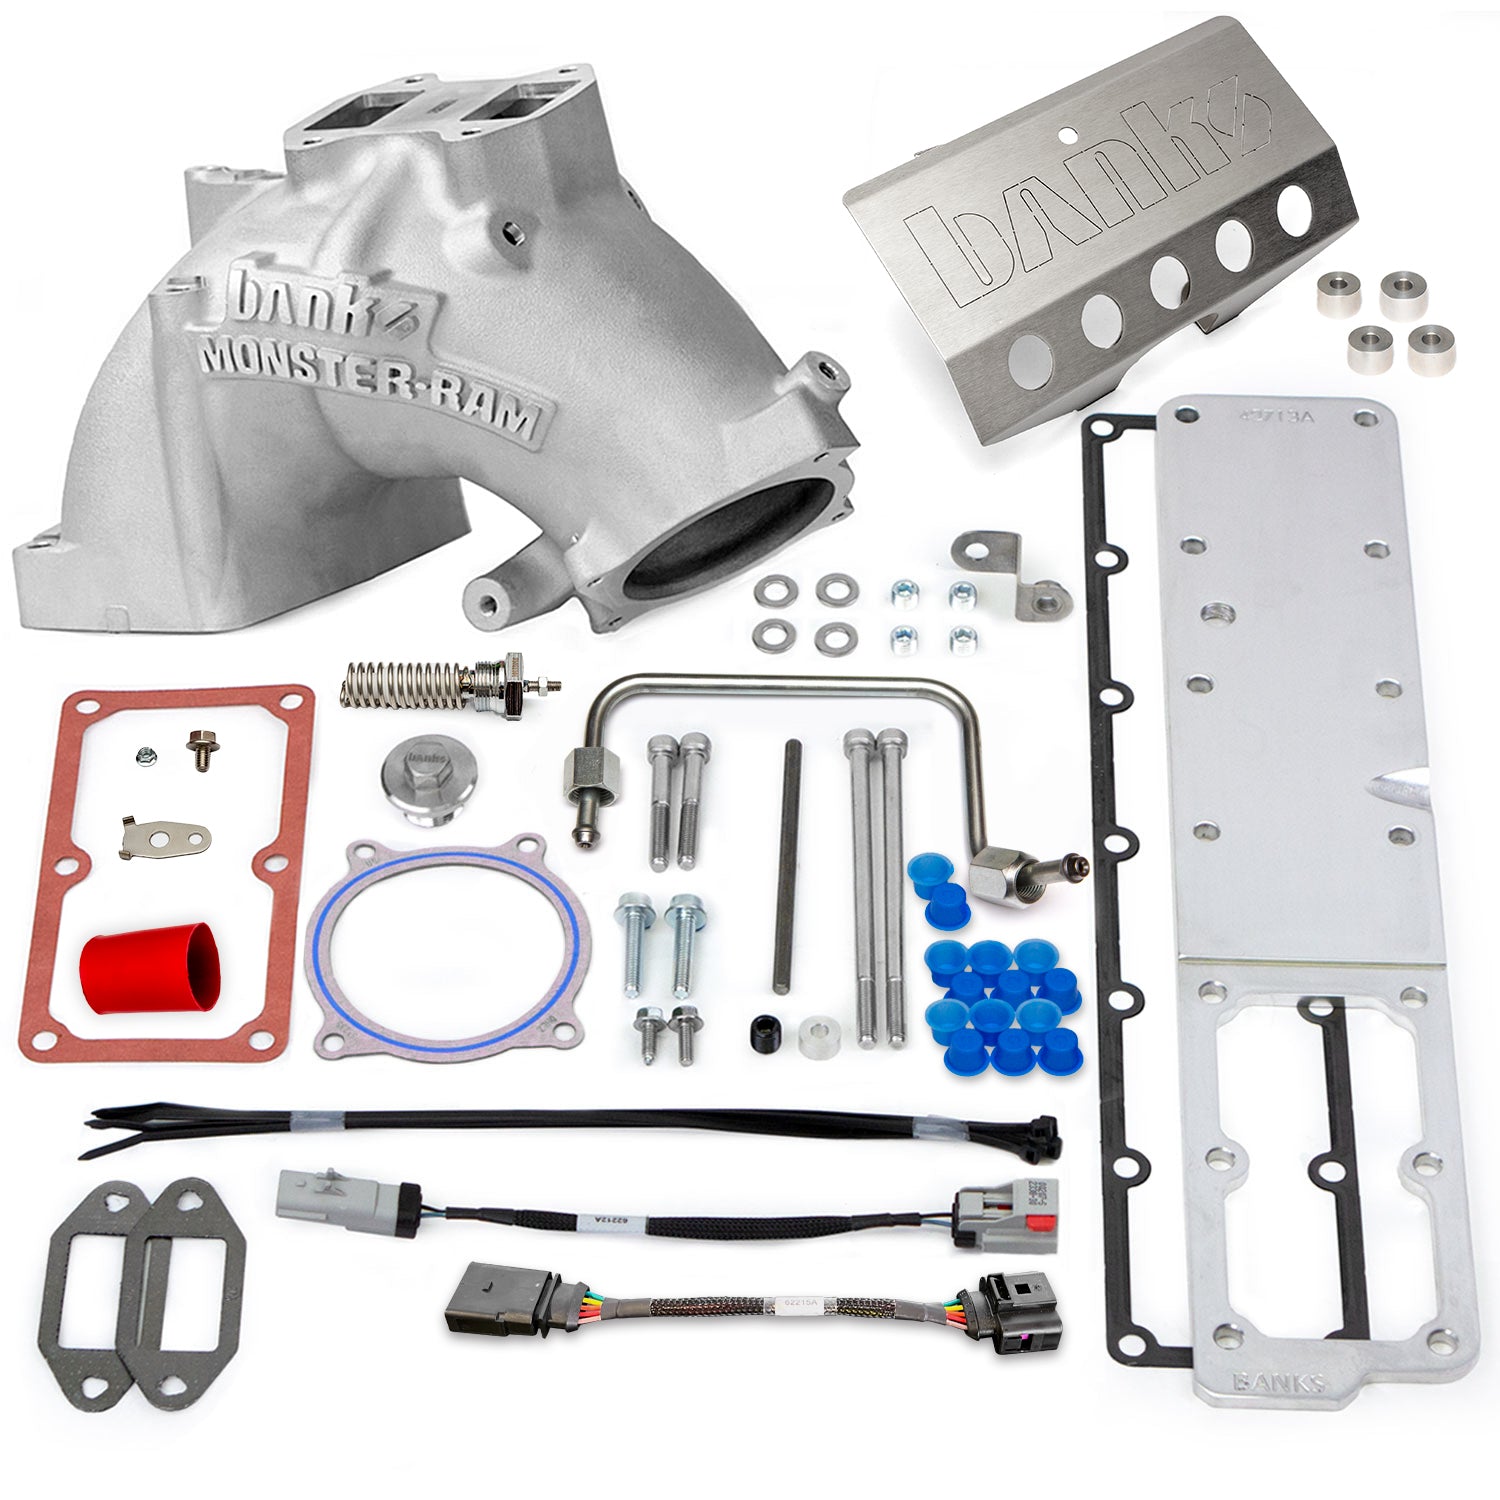 Parts included in the Banks Monster-Ram for 2019+ Ram 2500/3500 6.7L Cummins 42799